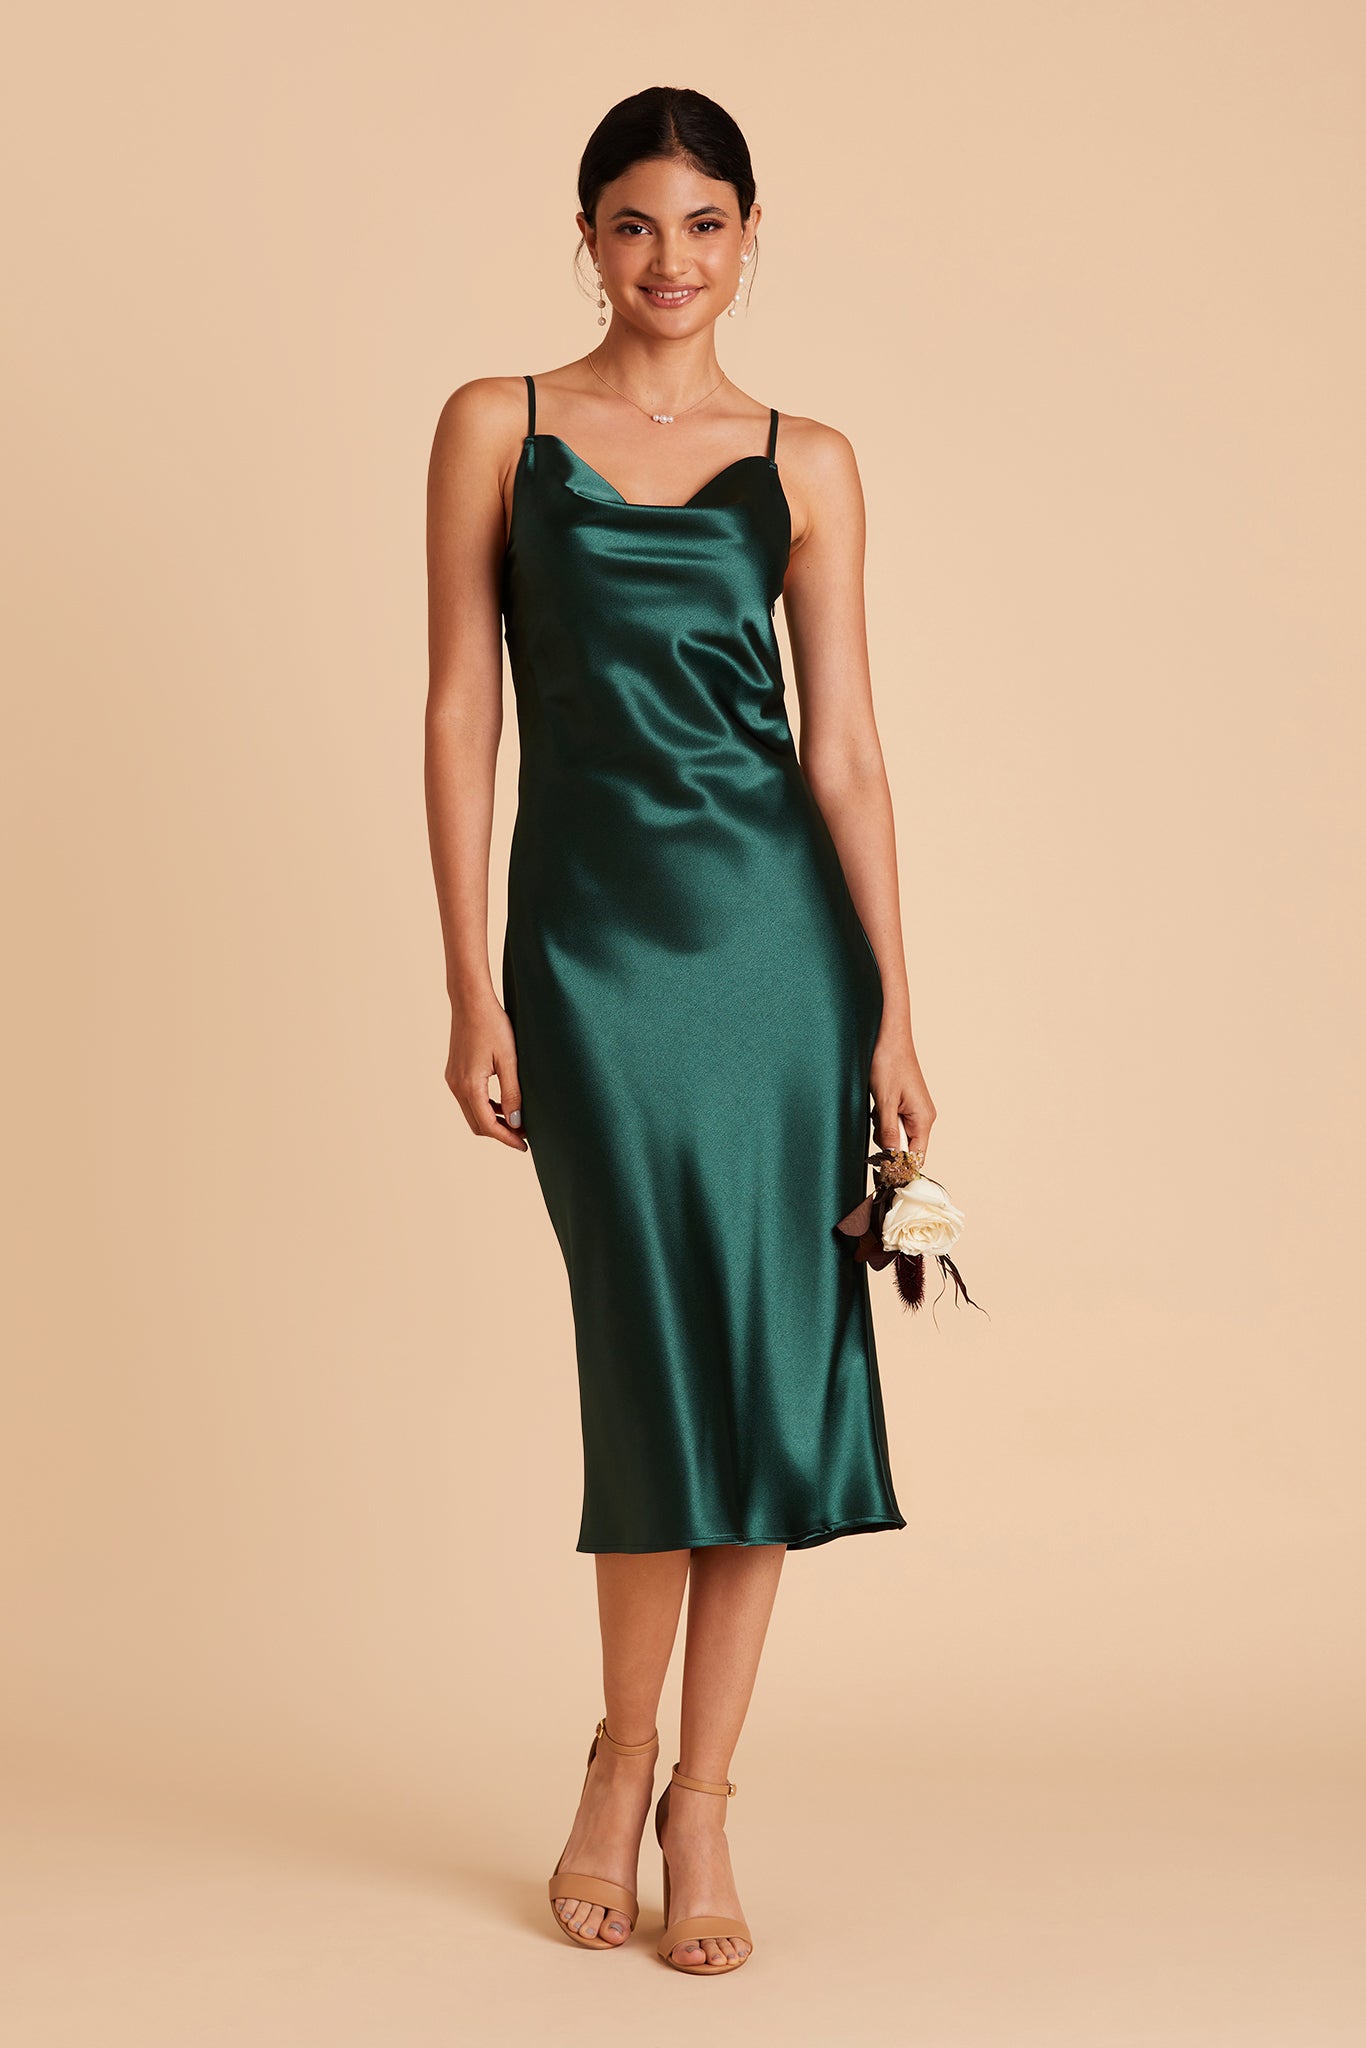 Lisa midi bridesmaid dress in emerald satin by Birdy Grey, front view